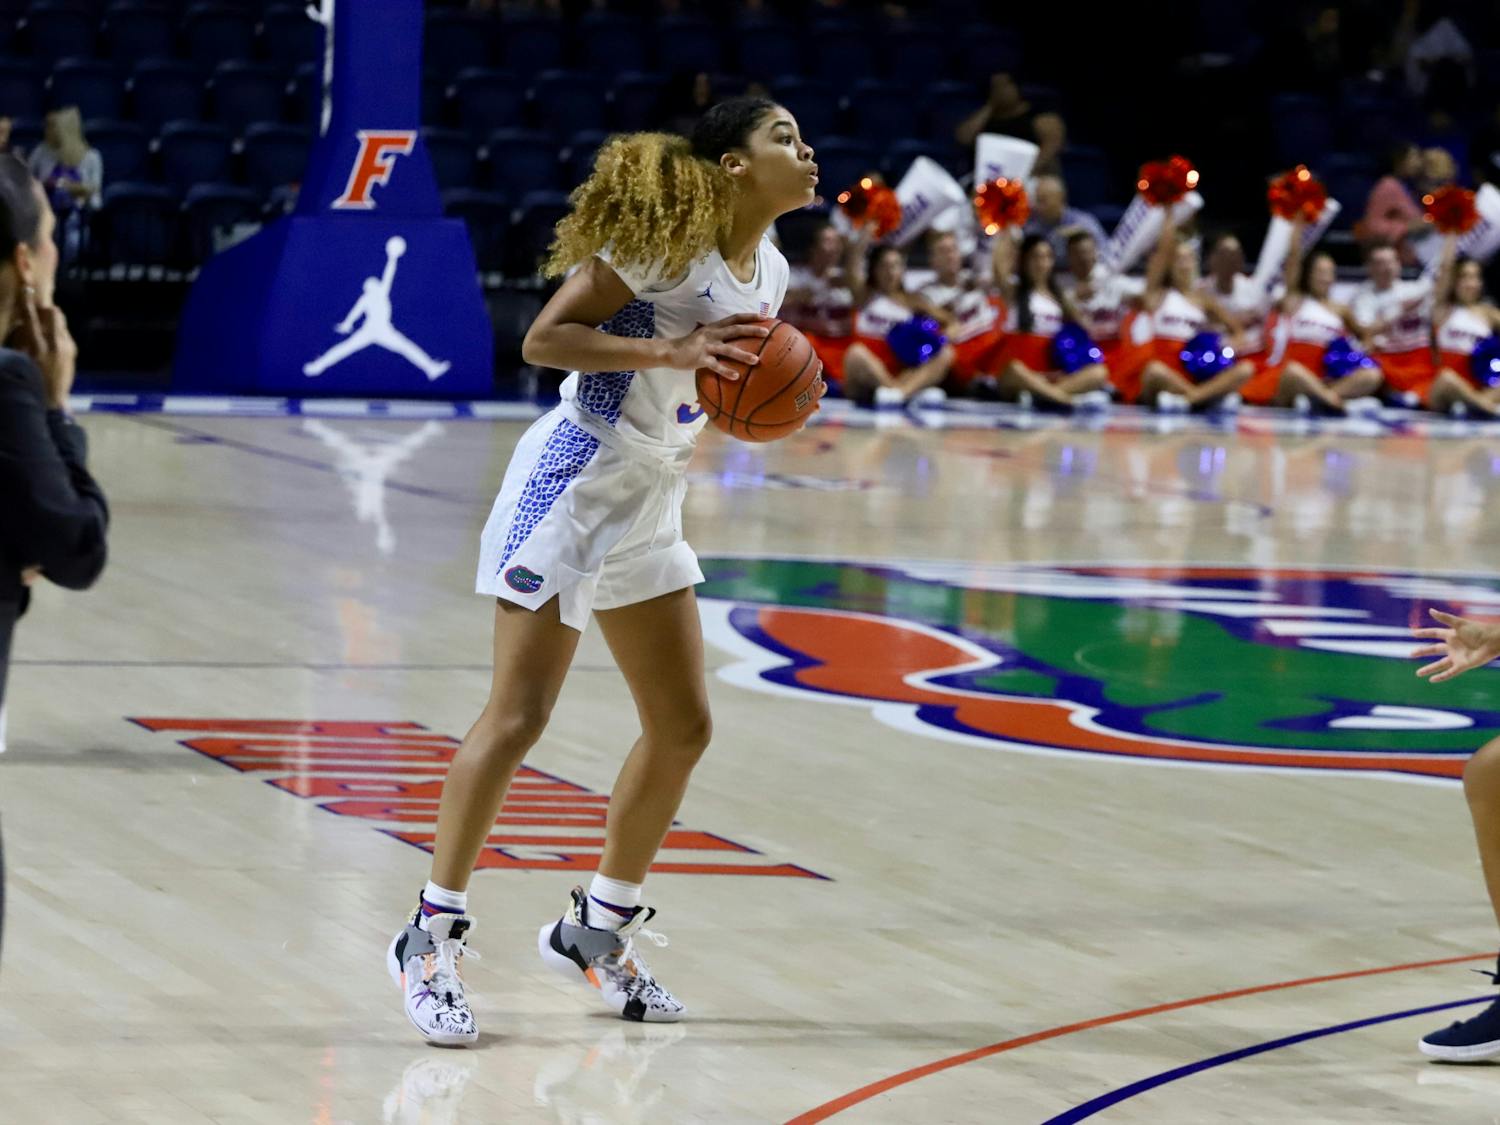 Gator guard Lavender Briggs facing Longwood University in November 2019. The Utah native scored nearly 1,000 points in over two seasons with the Gators.